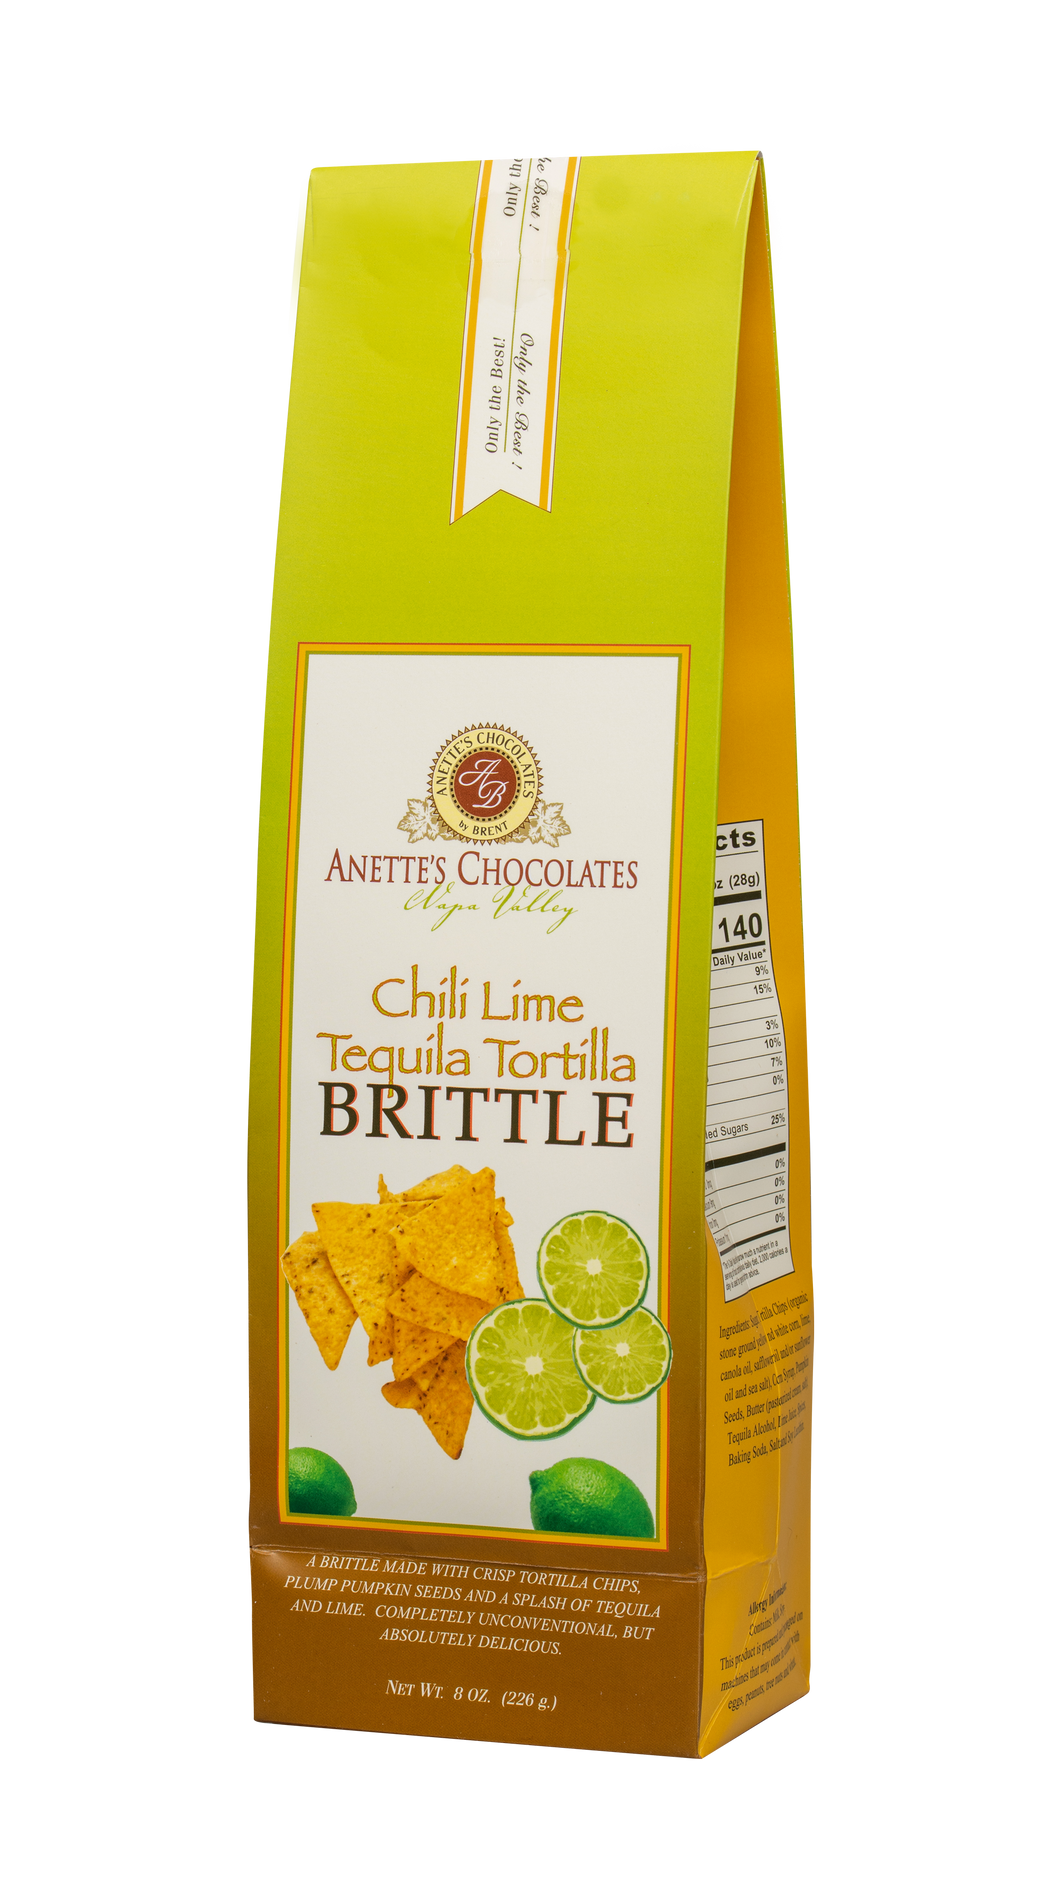 Brittle- Chili Lime Tequila Tortilla Brittle